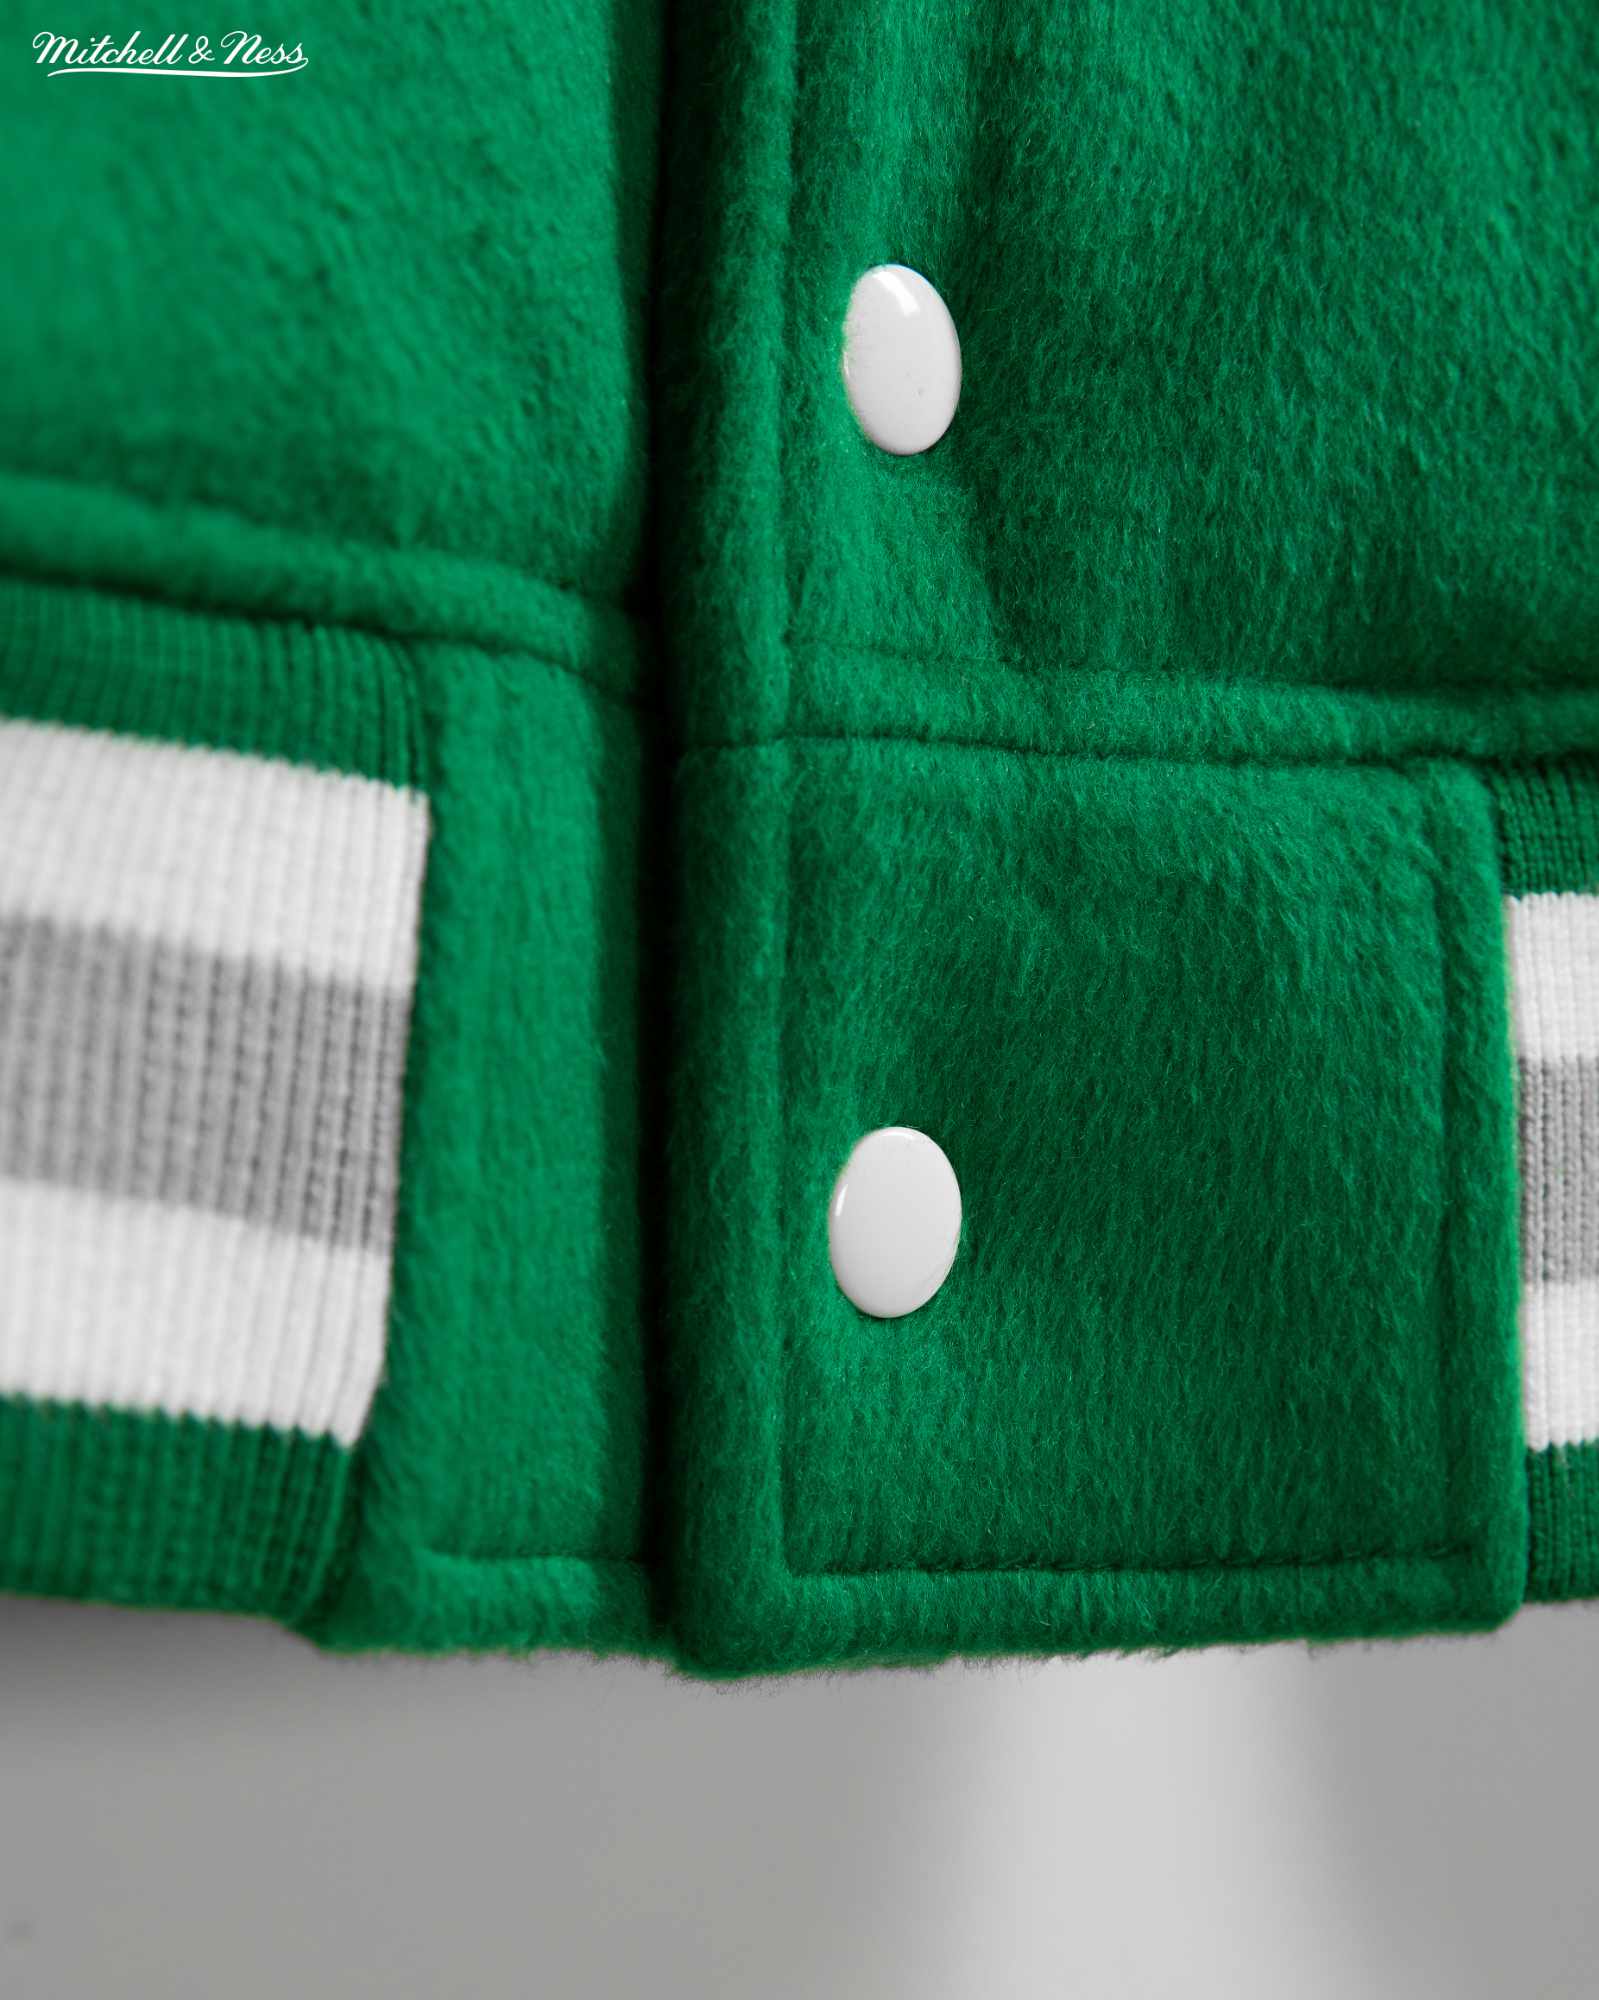 Eagles letterman jacket made famous by Princess Diana coming back